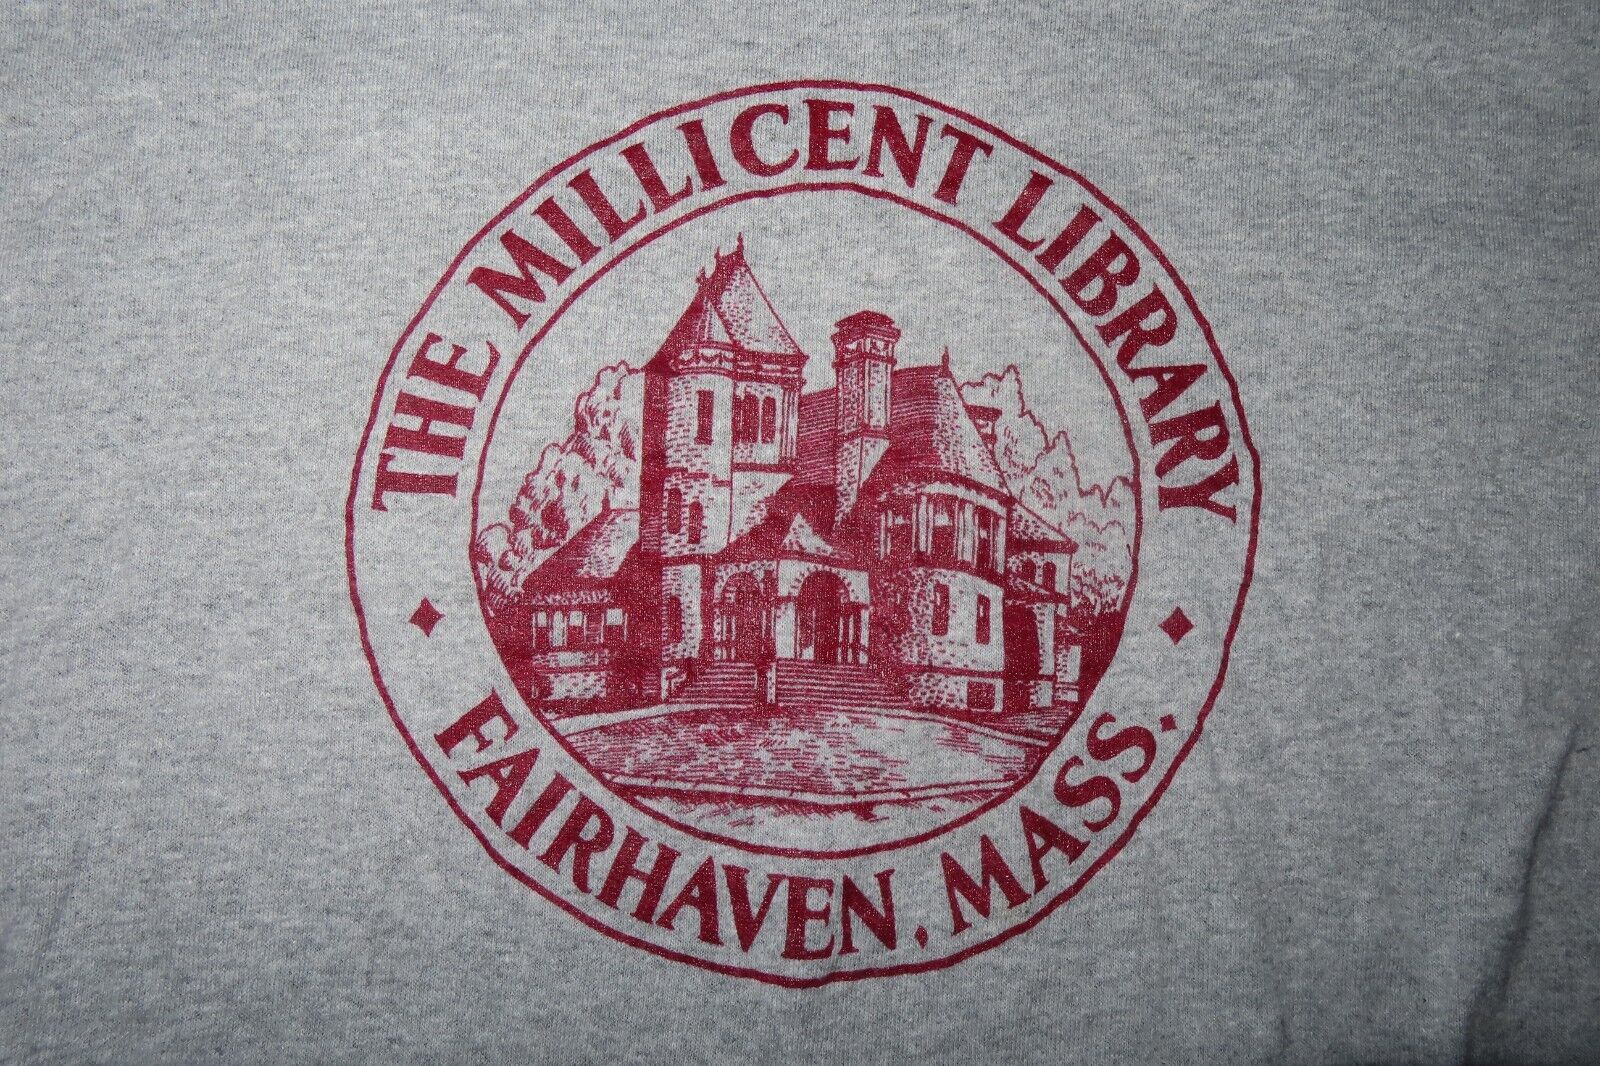 Vintage THE MILLICENT LIBRARY - FAIRHAVEN, MASS (MED) T-Shirt Single Stitch